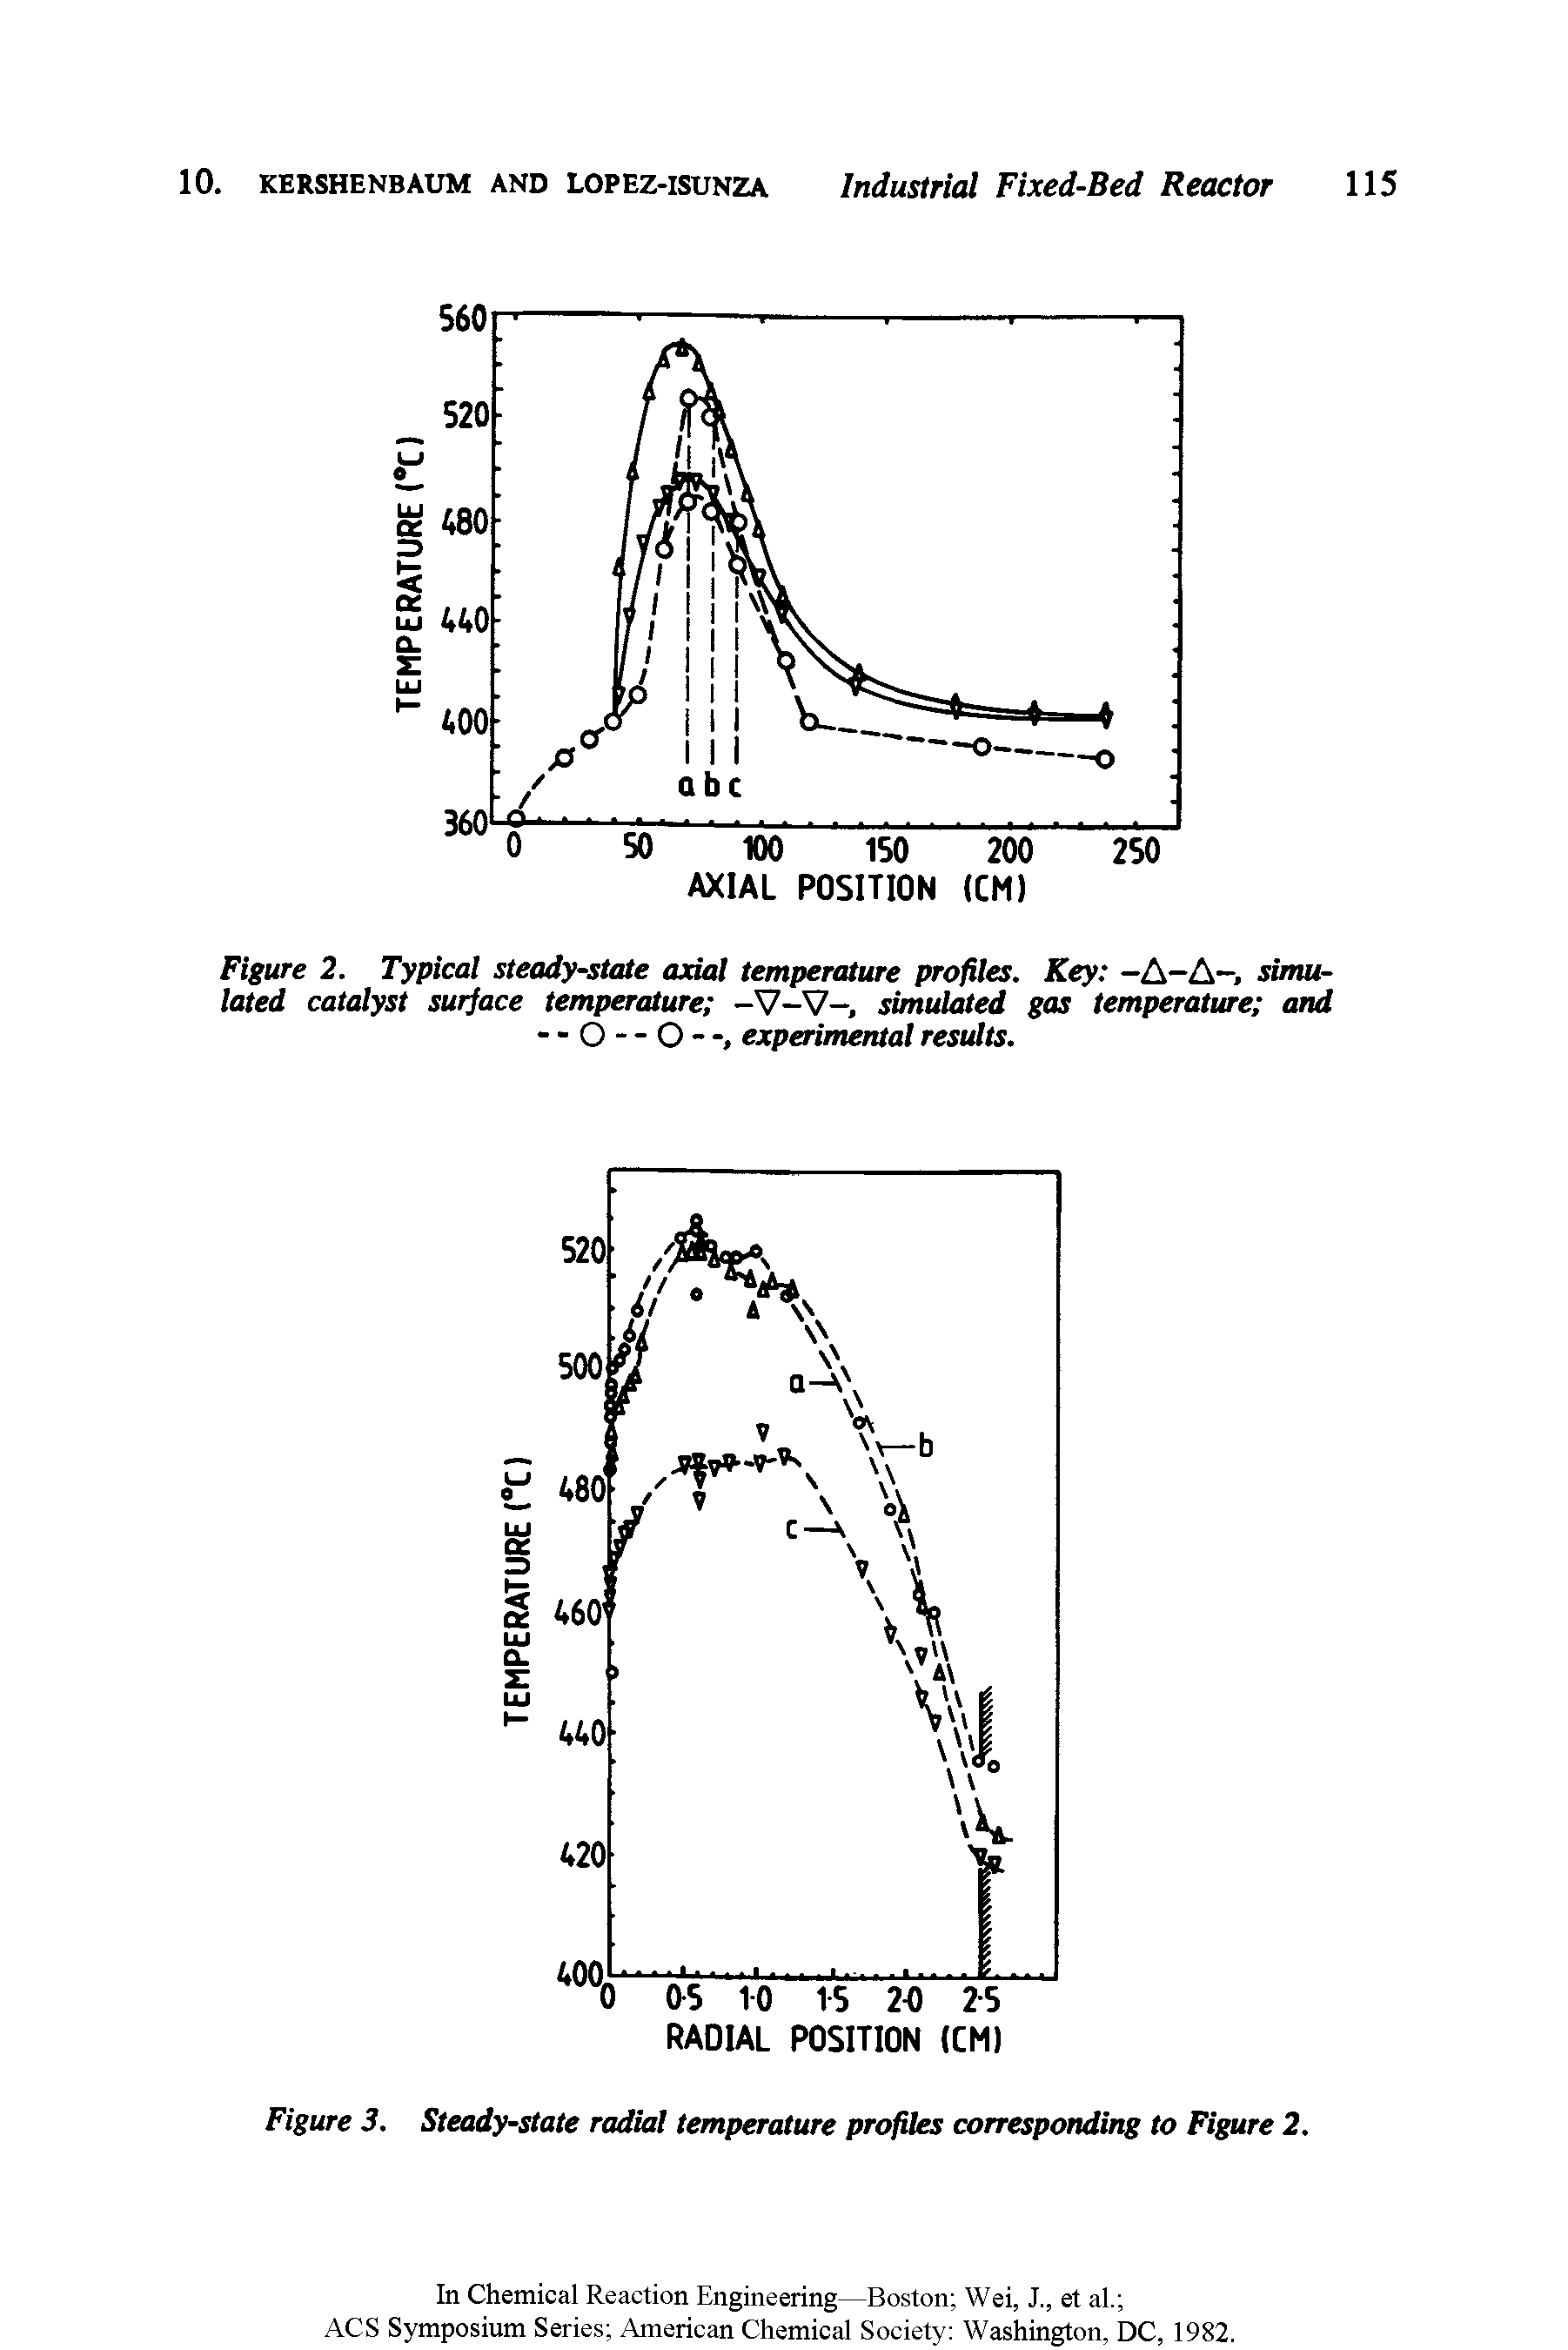 Figure 2. Typical steady-state axial temperature profiles. Key -A-A-, simulated catalyst surface temperature -V-V-, simulated gas temperature and...